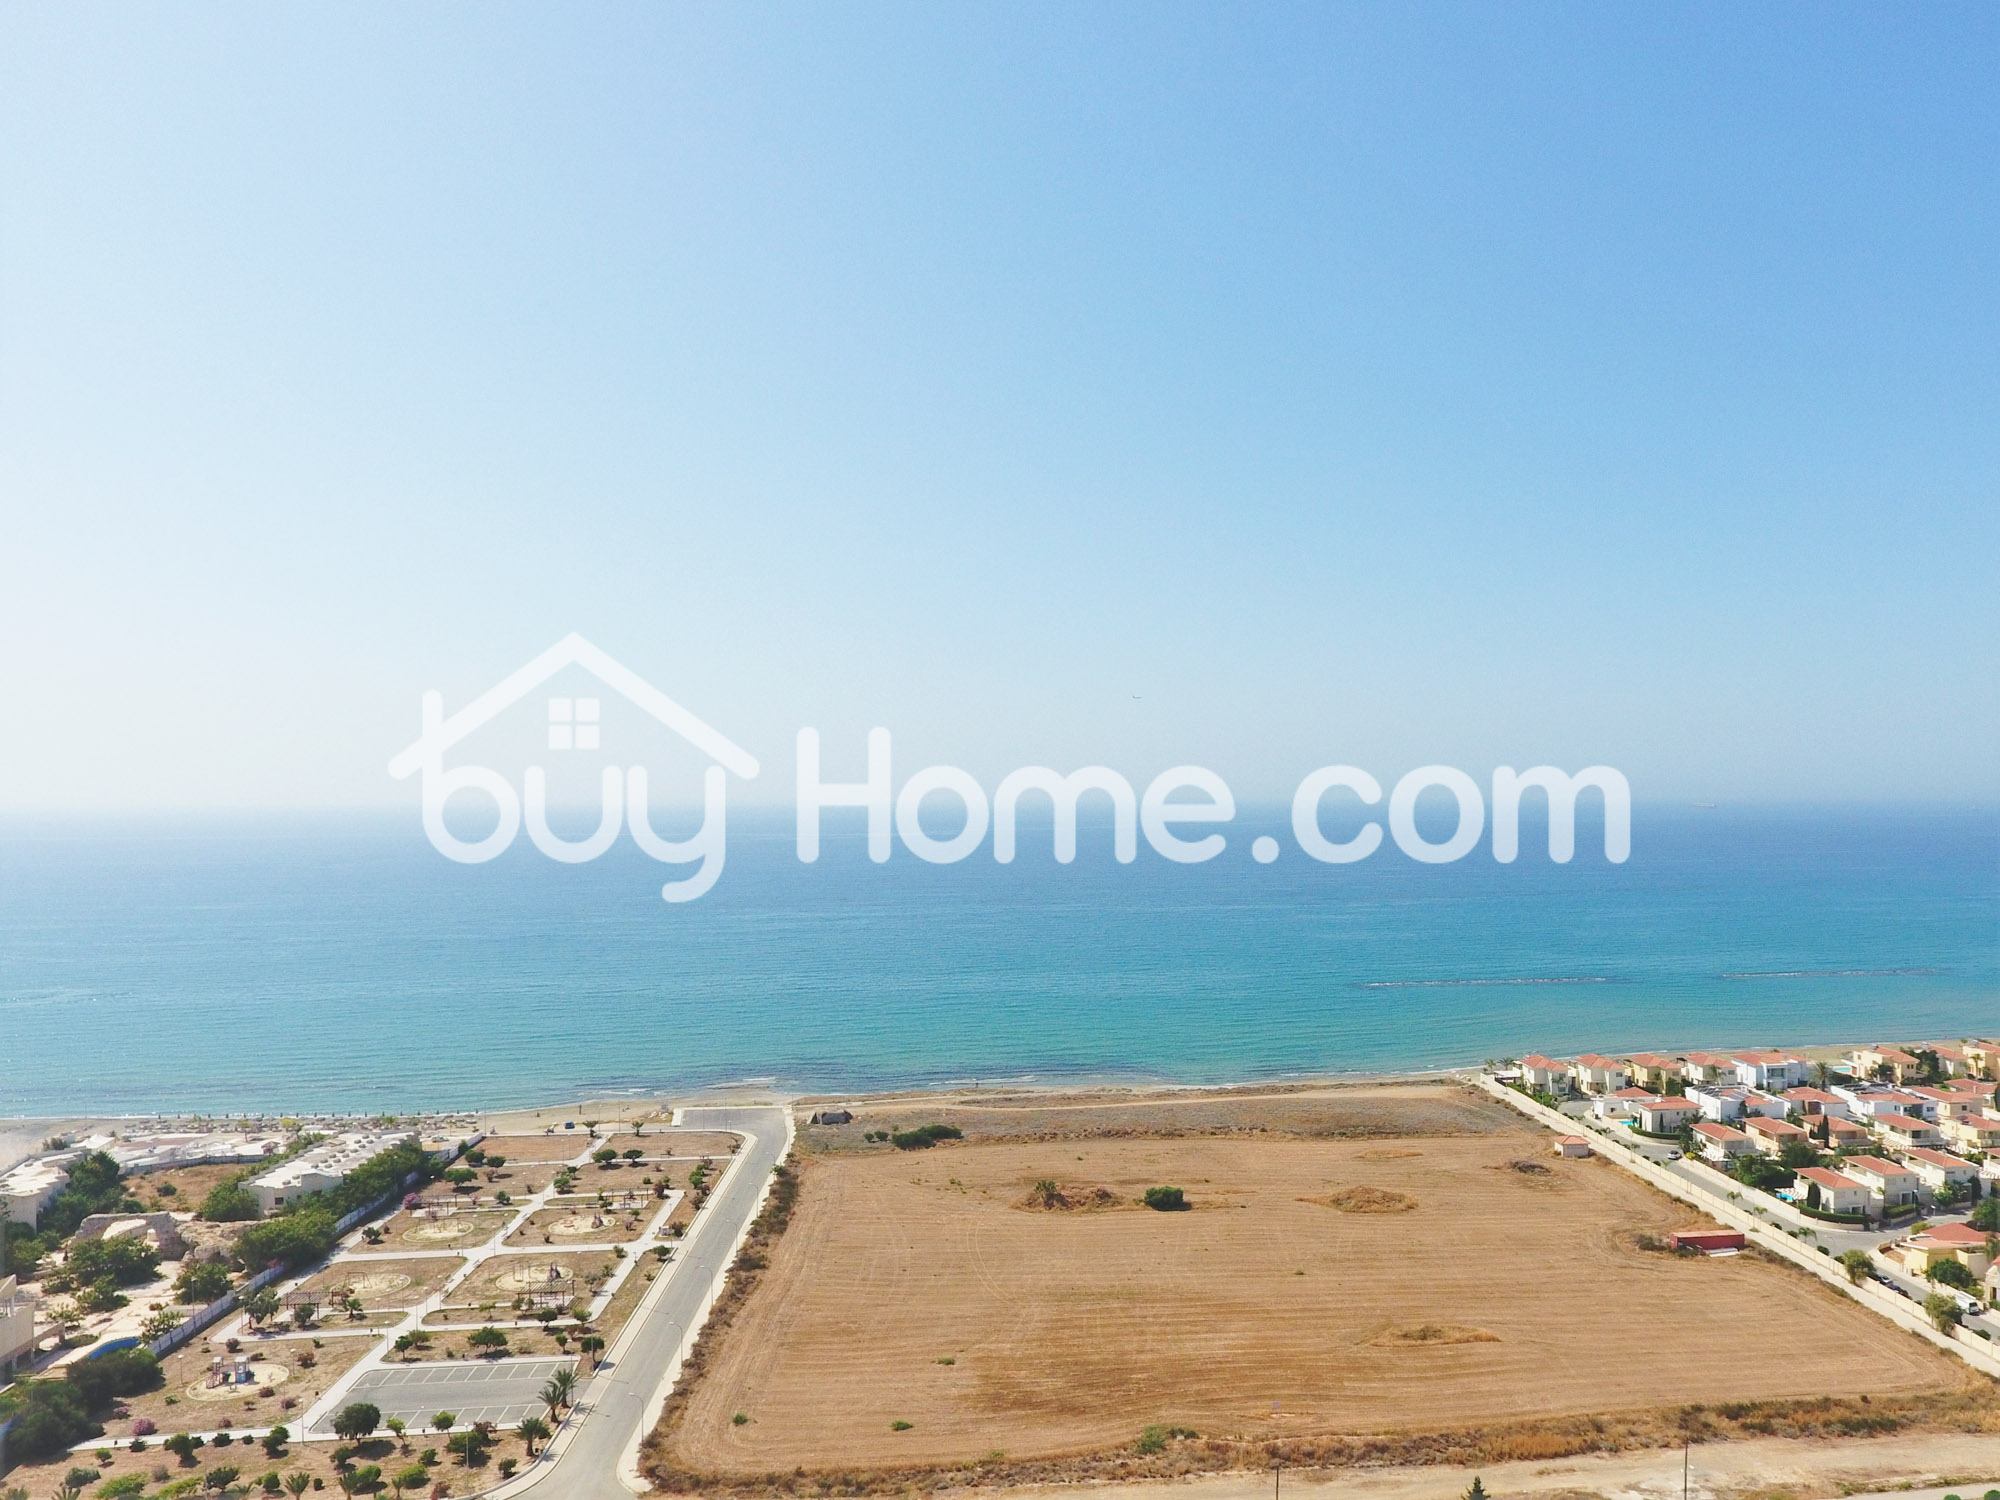 Land for sale | BuyHome